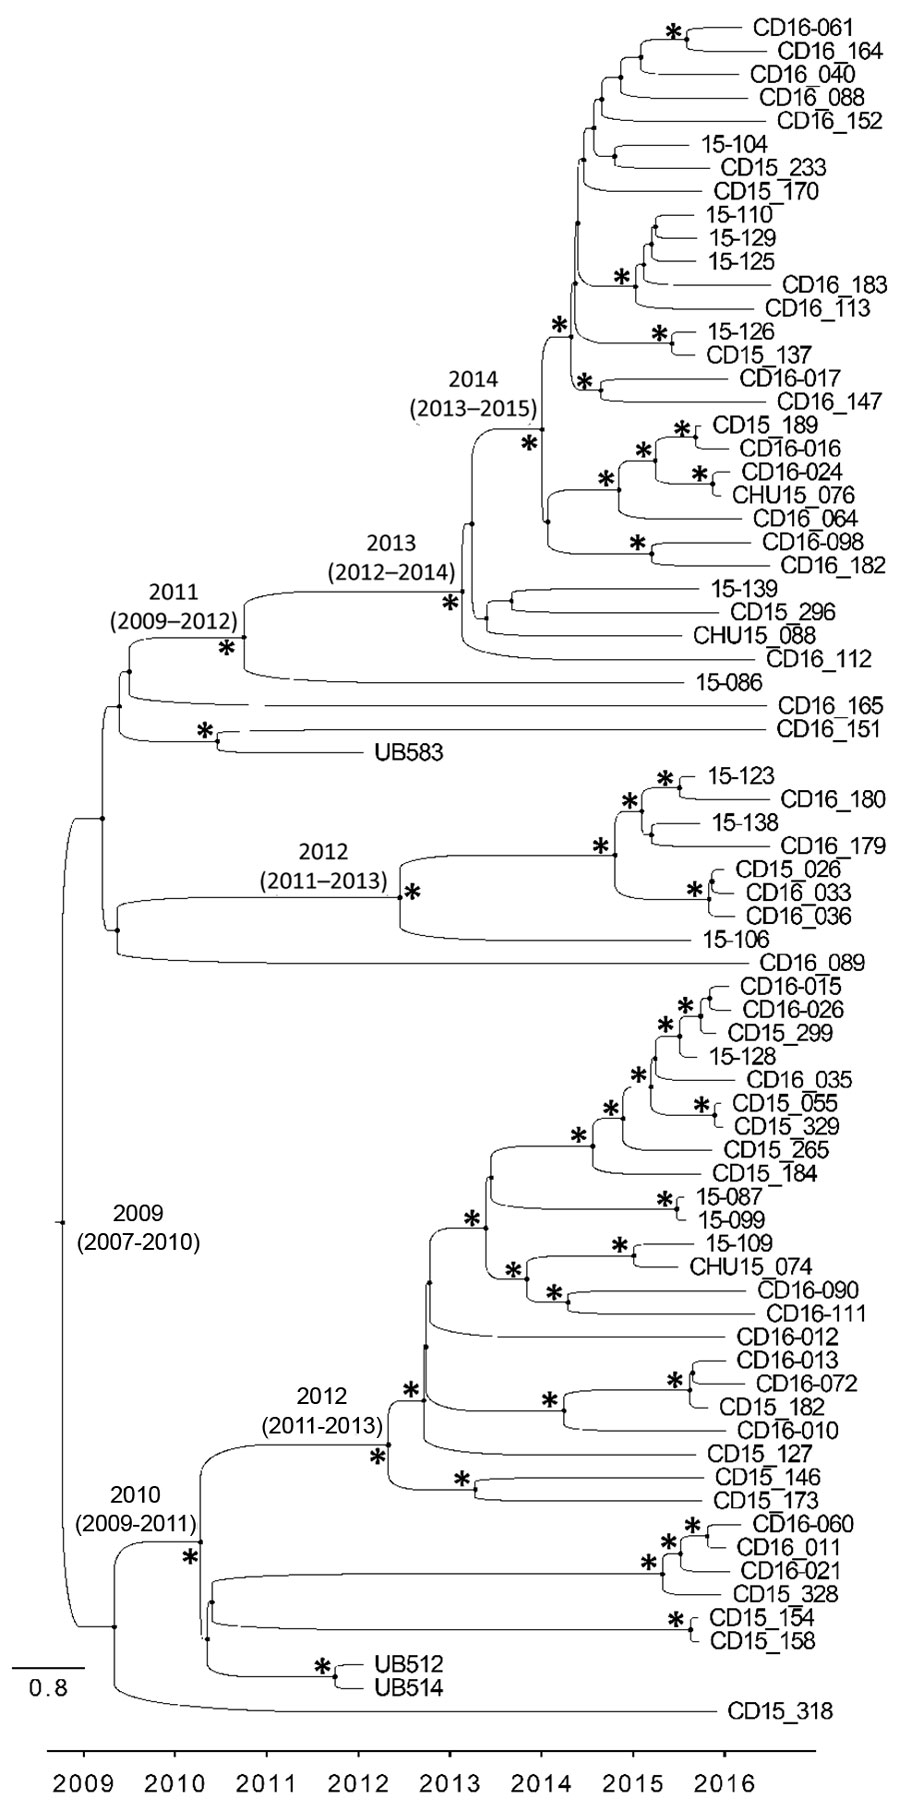 Time-calibrated phylogenetic tree of methicillin-resistant Staphylococcus aureus ST105(CC5)-SCCmecII-t002 lineage, Rio de Janeiro, Brazil, 2014–2017. Chronogram constructed using Bayesian phylogenetic analysis of single-nucleotide polymorphisms from 73 genomes. Maximum clade credibility tree estimated using a strict clock rate of 1.1927 × 10–6 substitutions/site/year (95% highest posterior density 1.5054–2.3351 × 10–6). Node labels indicate 95% highest posterior density values of major clades. Asterisks (*) indicate posterior values >0.98. Scale indicates substitutions per site per year. CC, clonal complex; SCC, staphylococcal cassette chromosome; ST, sequence type.